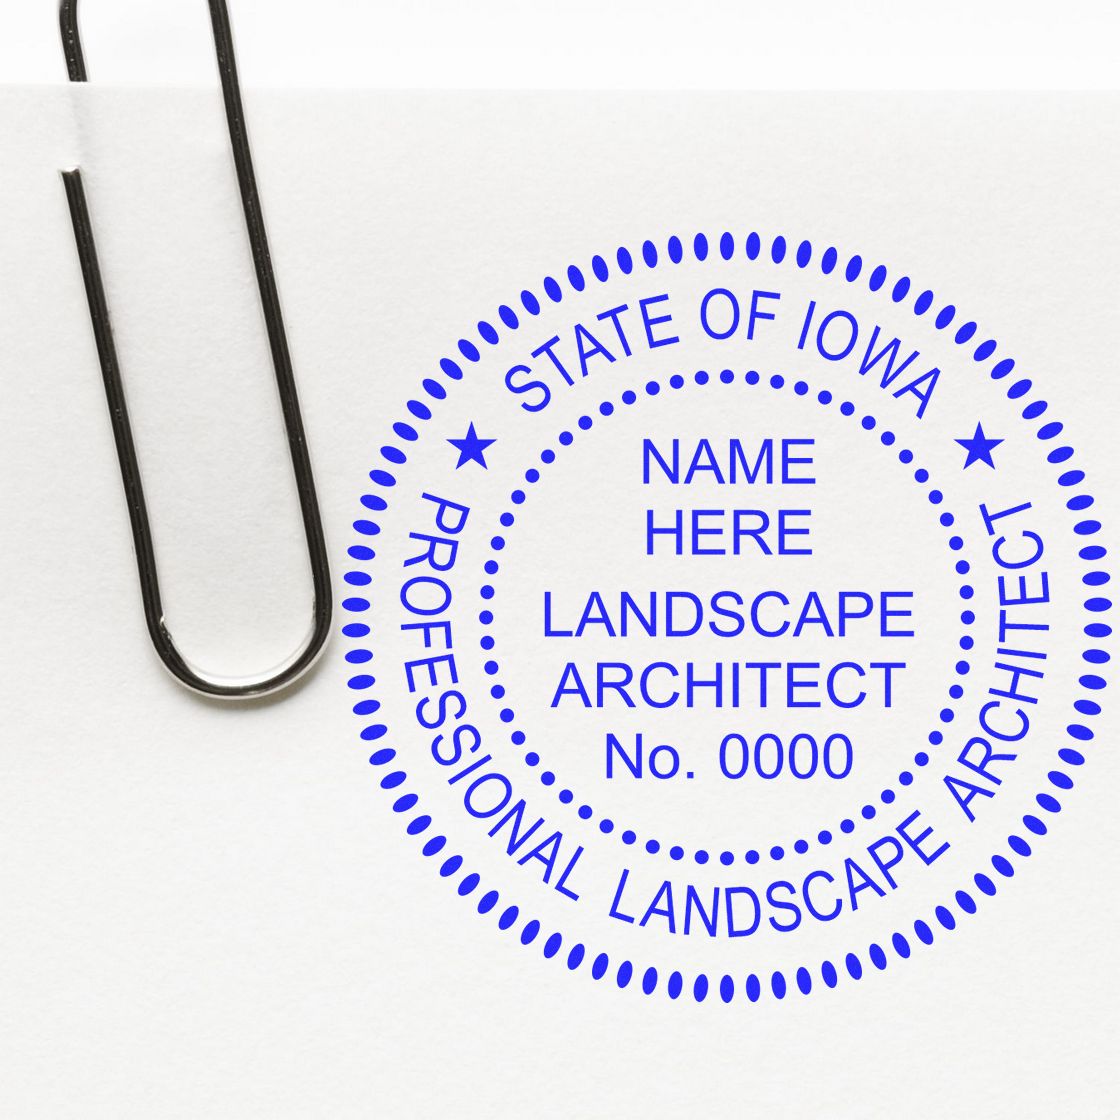 The main image for the Premium MaxLight Pre-Inked Iowa Landscape Architectural Stamp depicting a sample of the imprint and electronic files